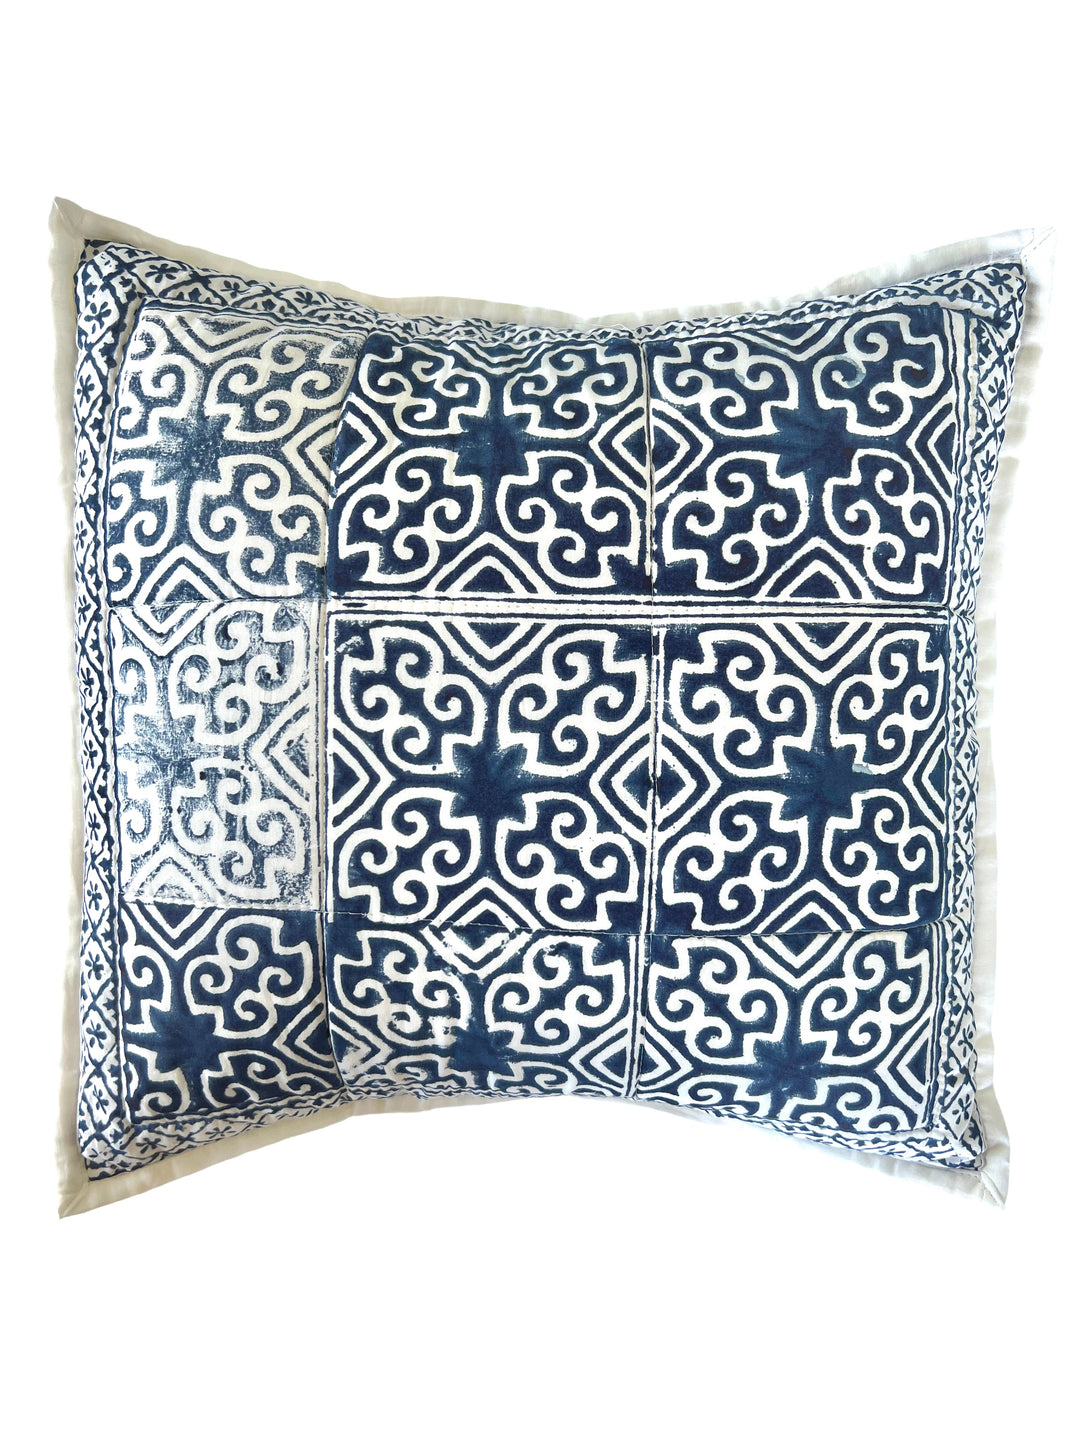 Indigo Tile - 16" square quilted pillow cover